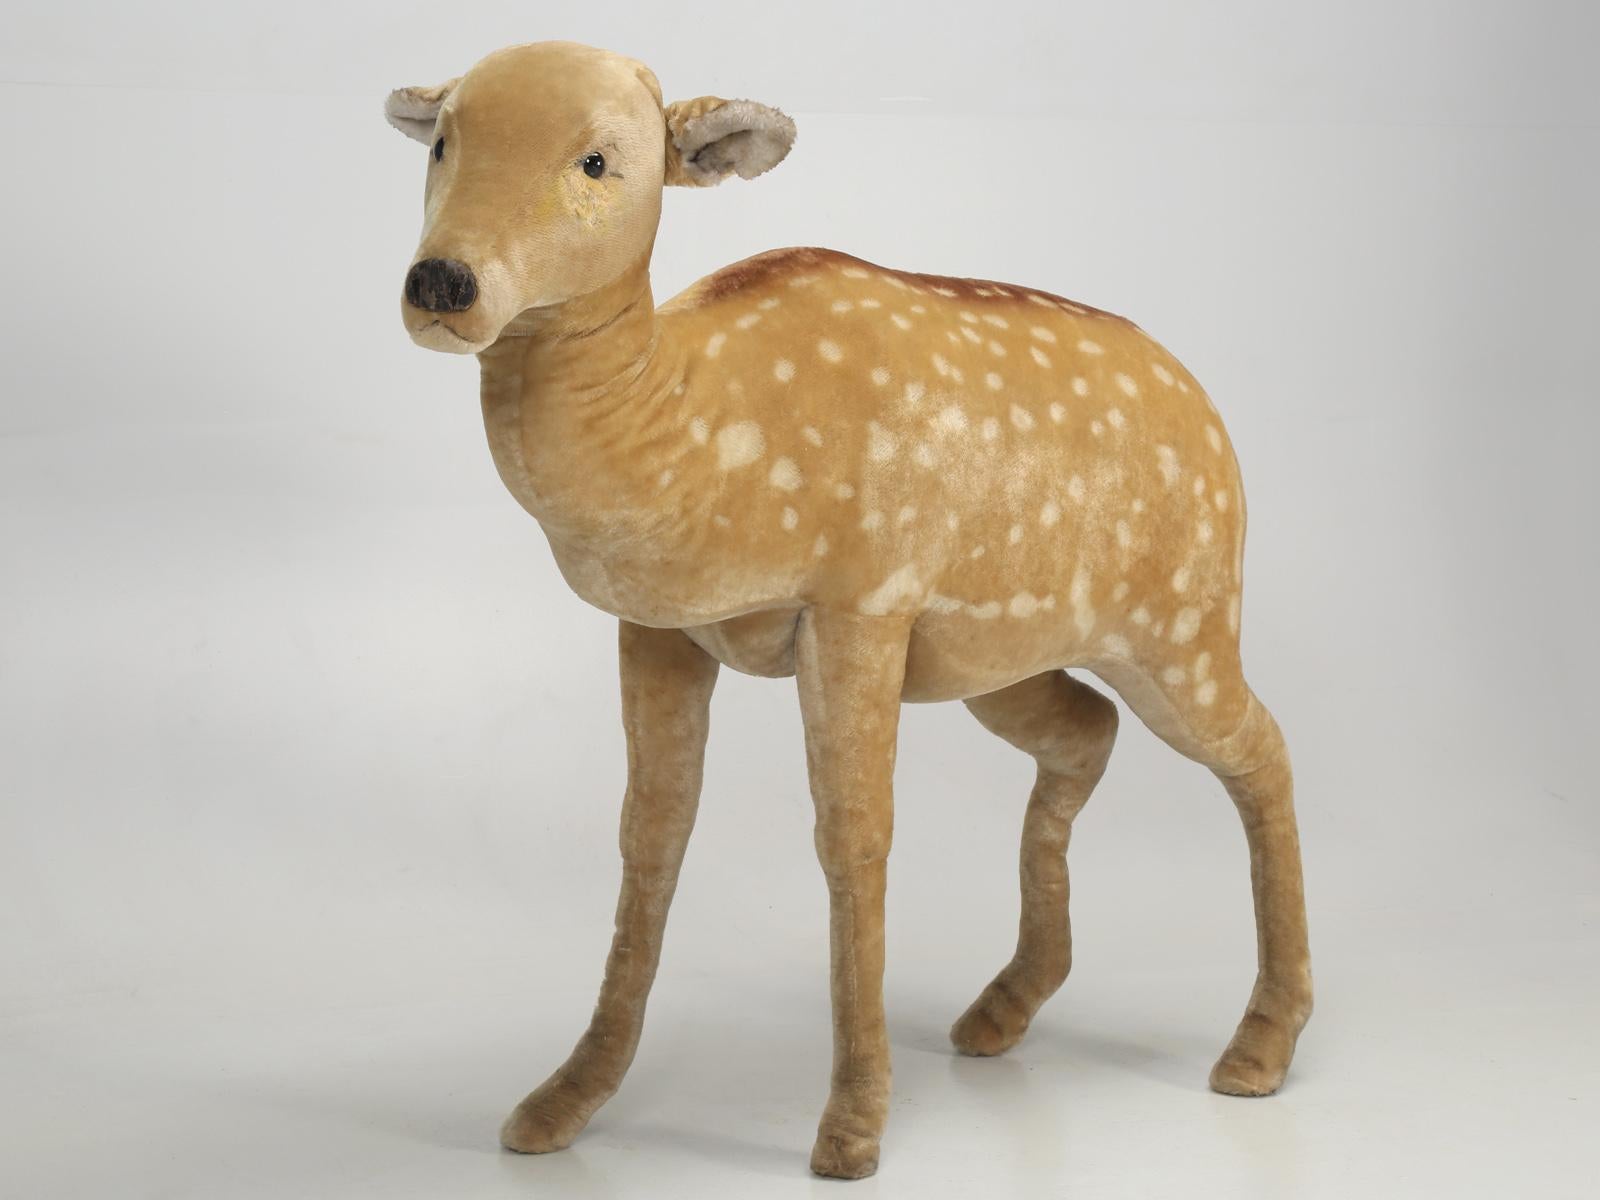 Life-sized, mohair Steiff Elk, probably from the 1960s. Steiff referred to these life-size stuffed creatures as, “studio animals” and were very expensive when new. As I child, we would occasionally visit New York City and I can remember seeing them